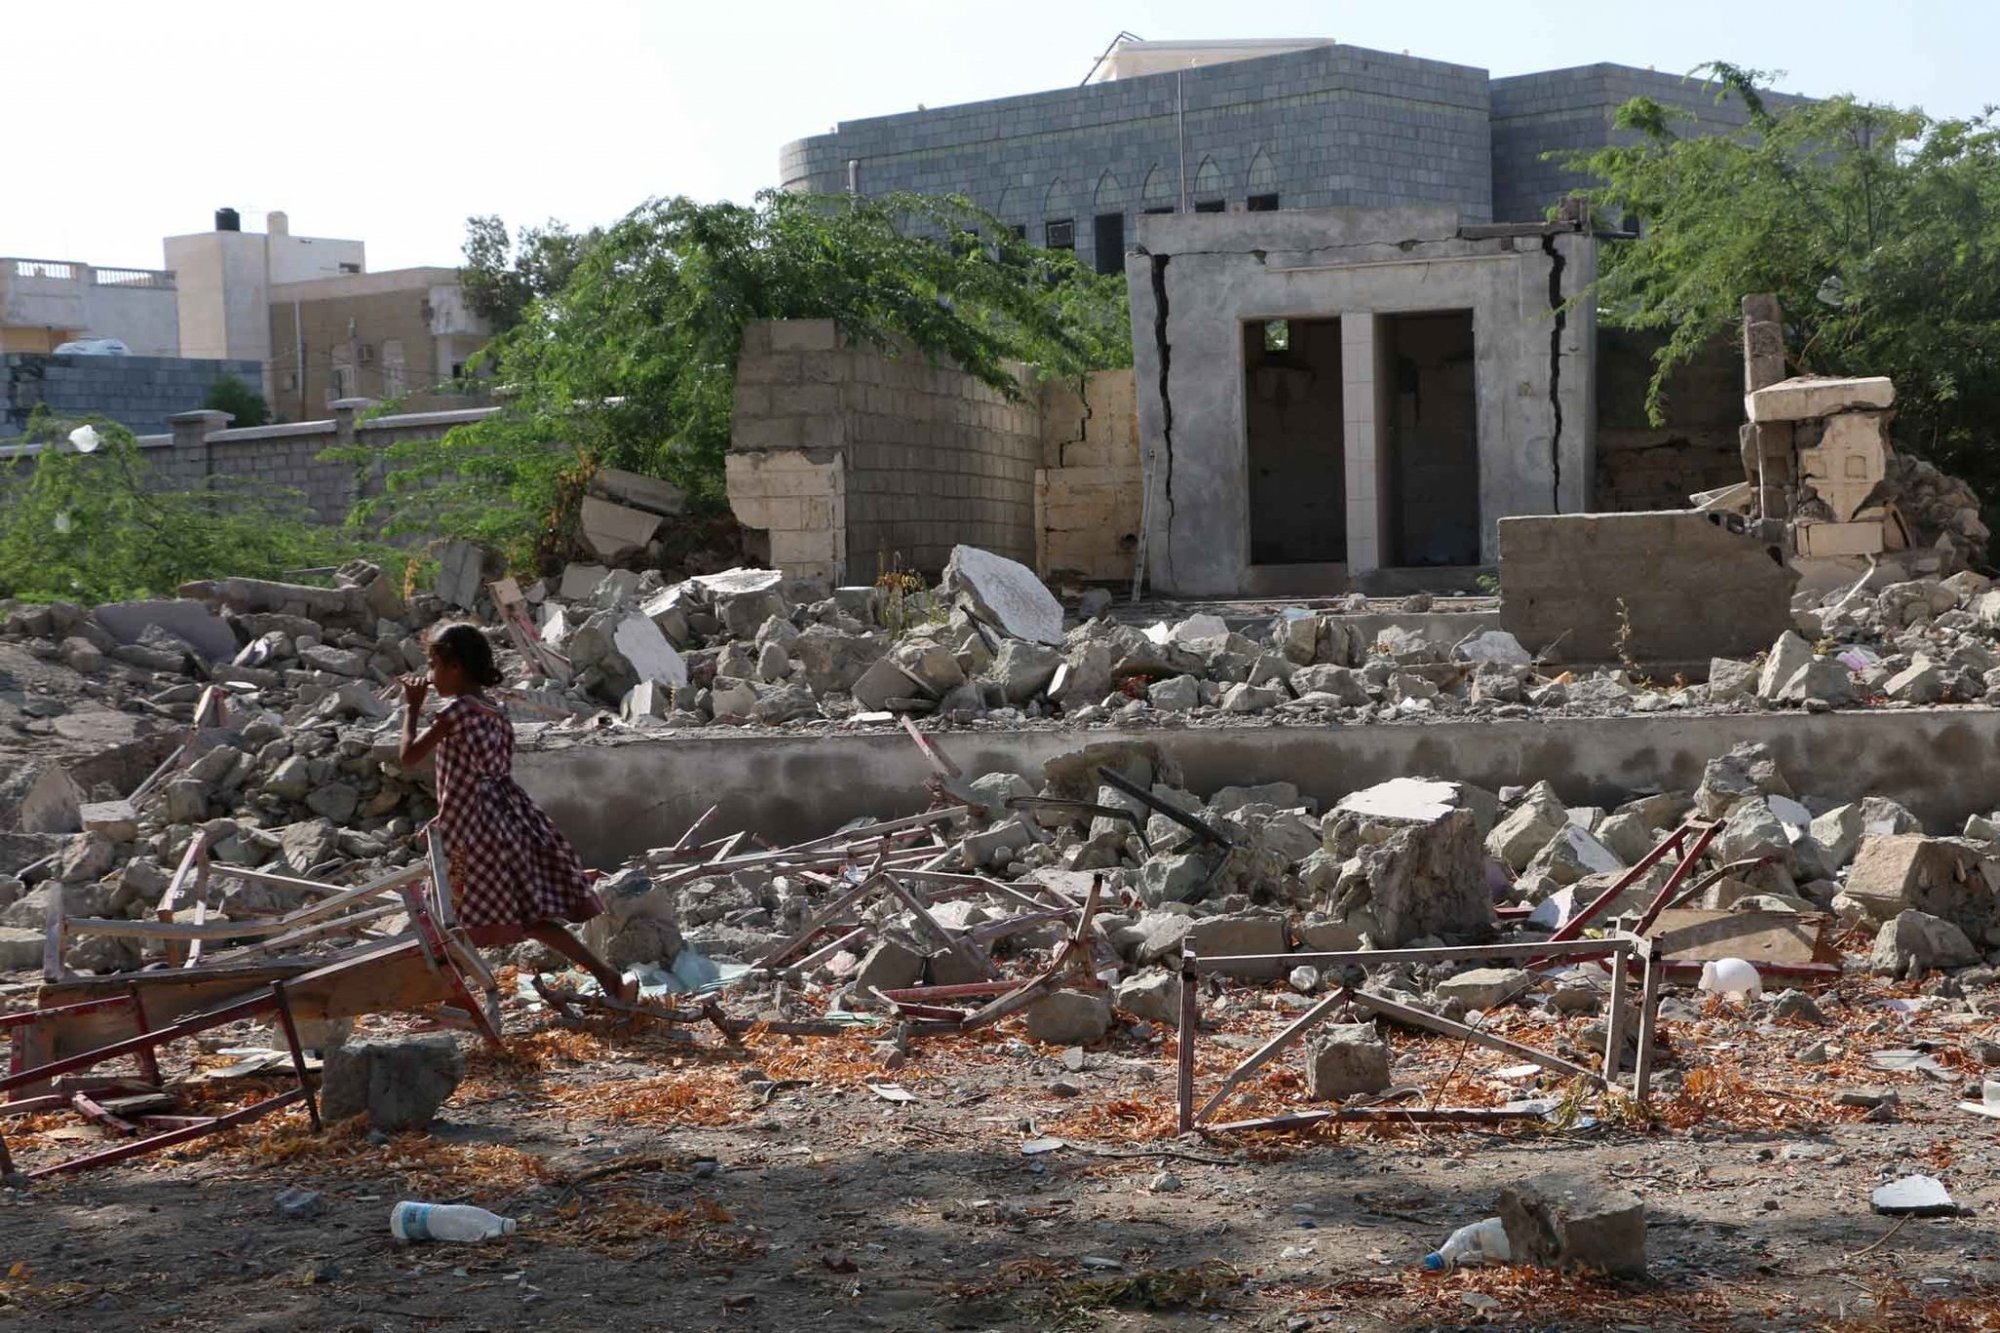 The al-Shaymeh Education Complex for Girls after it was struck by missiles fired by the Saudi Arabia-led coalition. Hodeidah, Yemen. November 9, 2015. Photo Courtesy Amnesty International